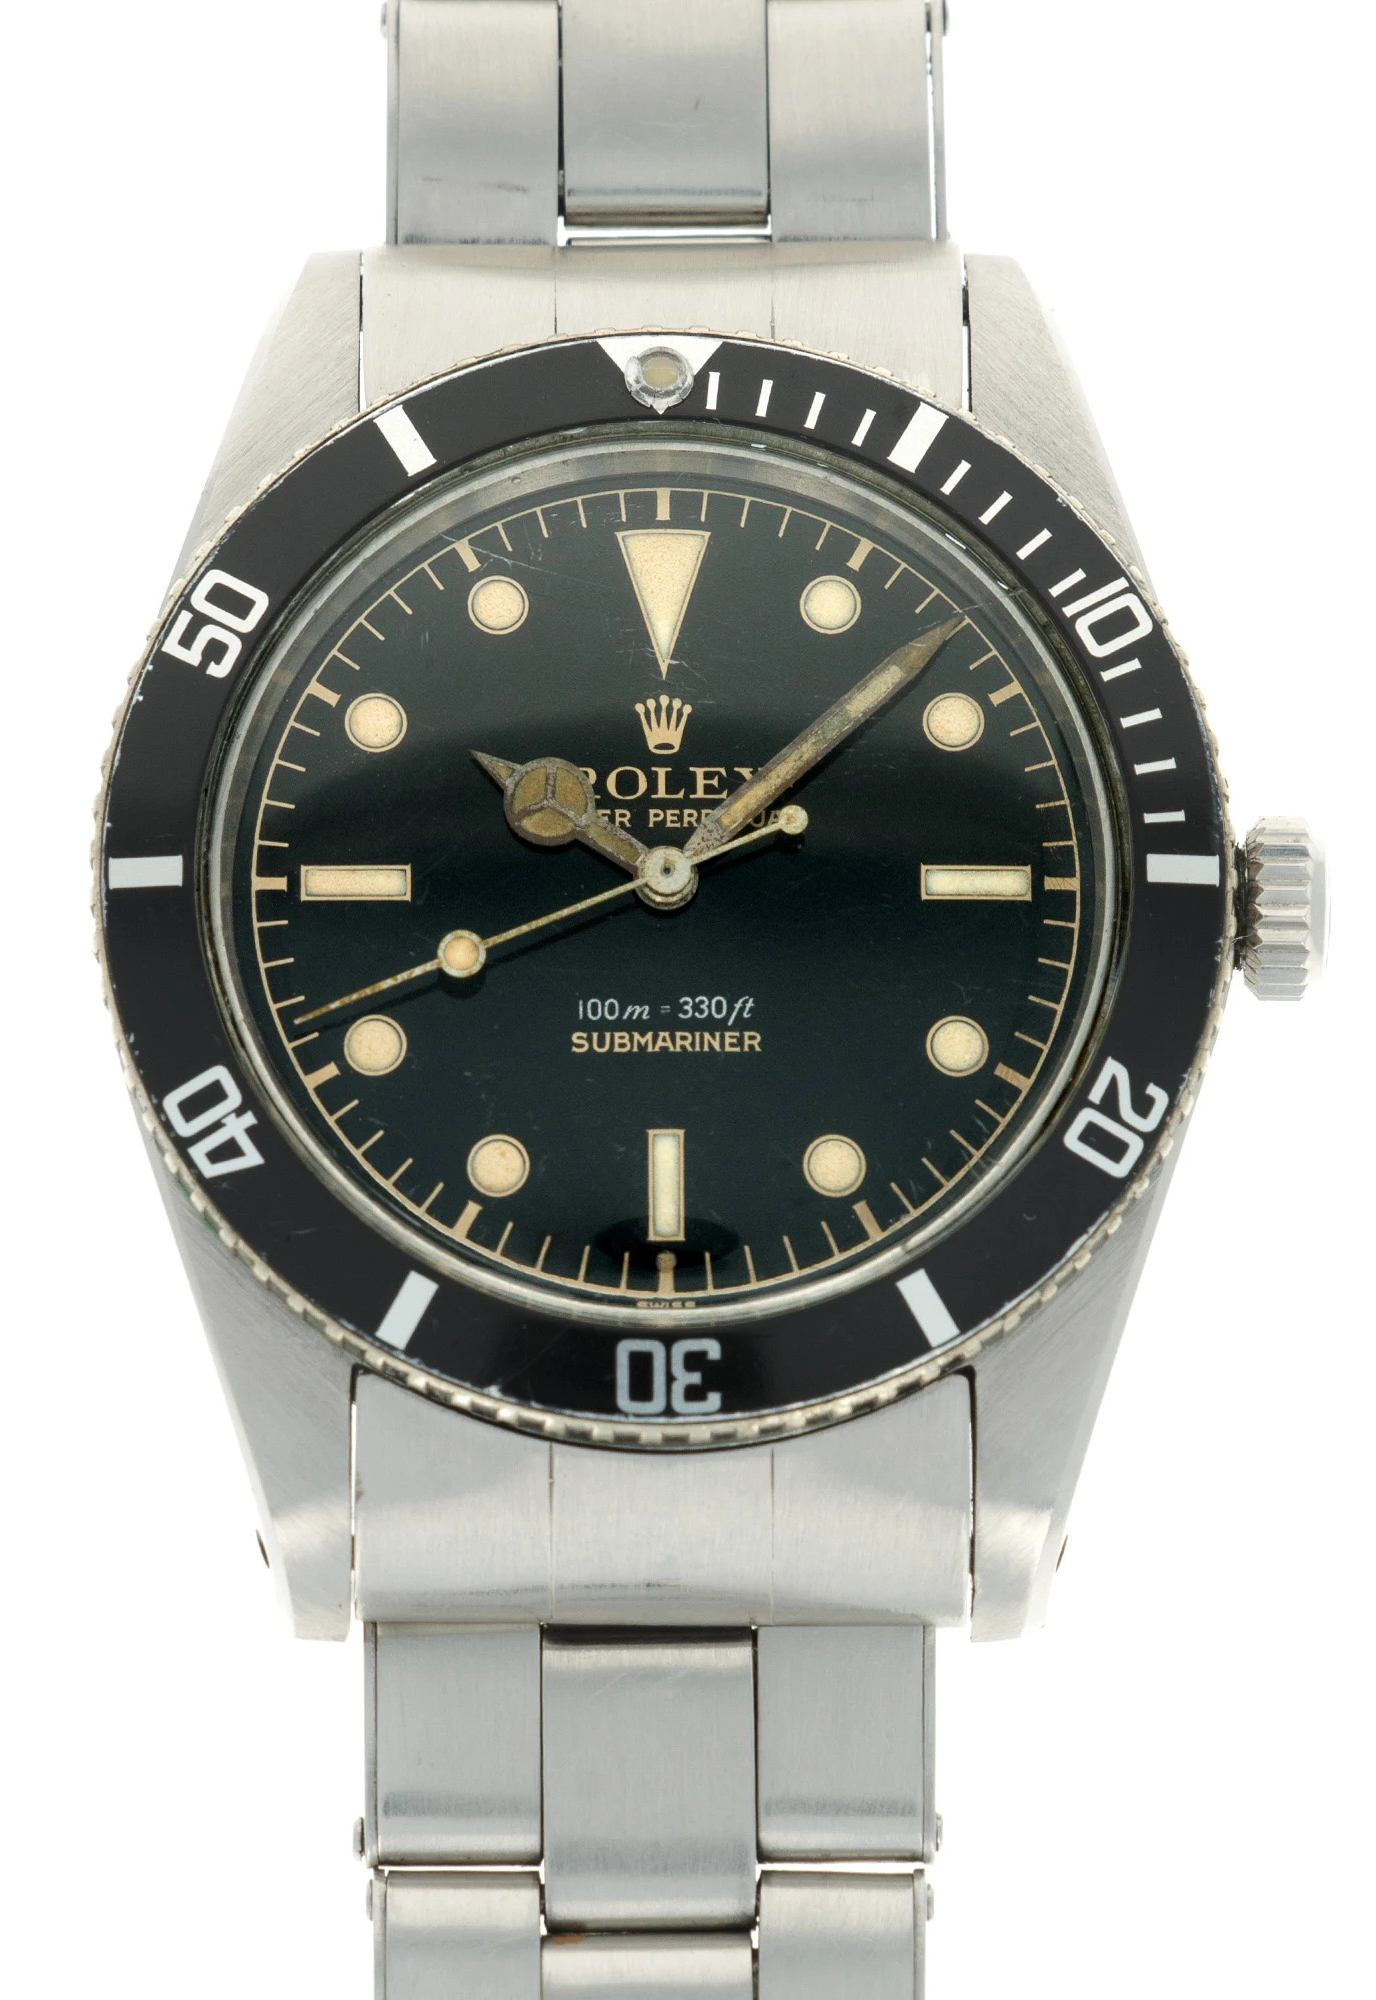 Rolex-5508-Submariner-Exclamation-Point